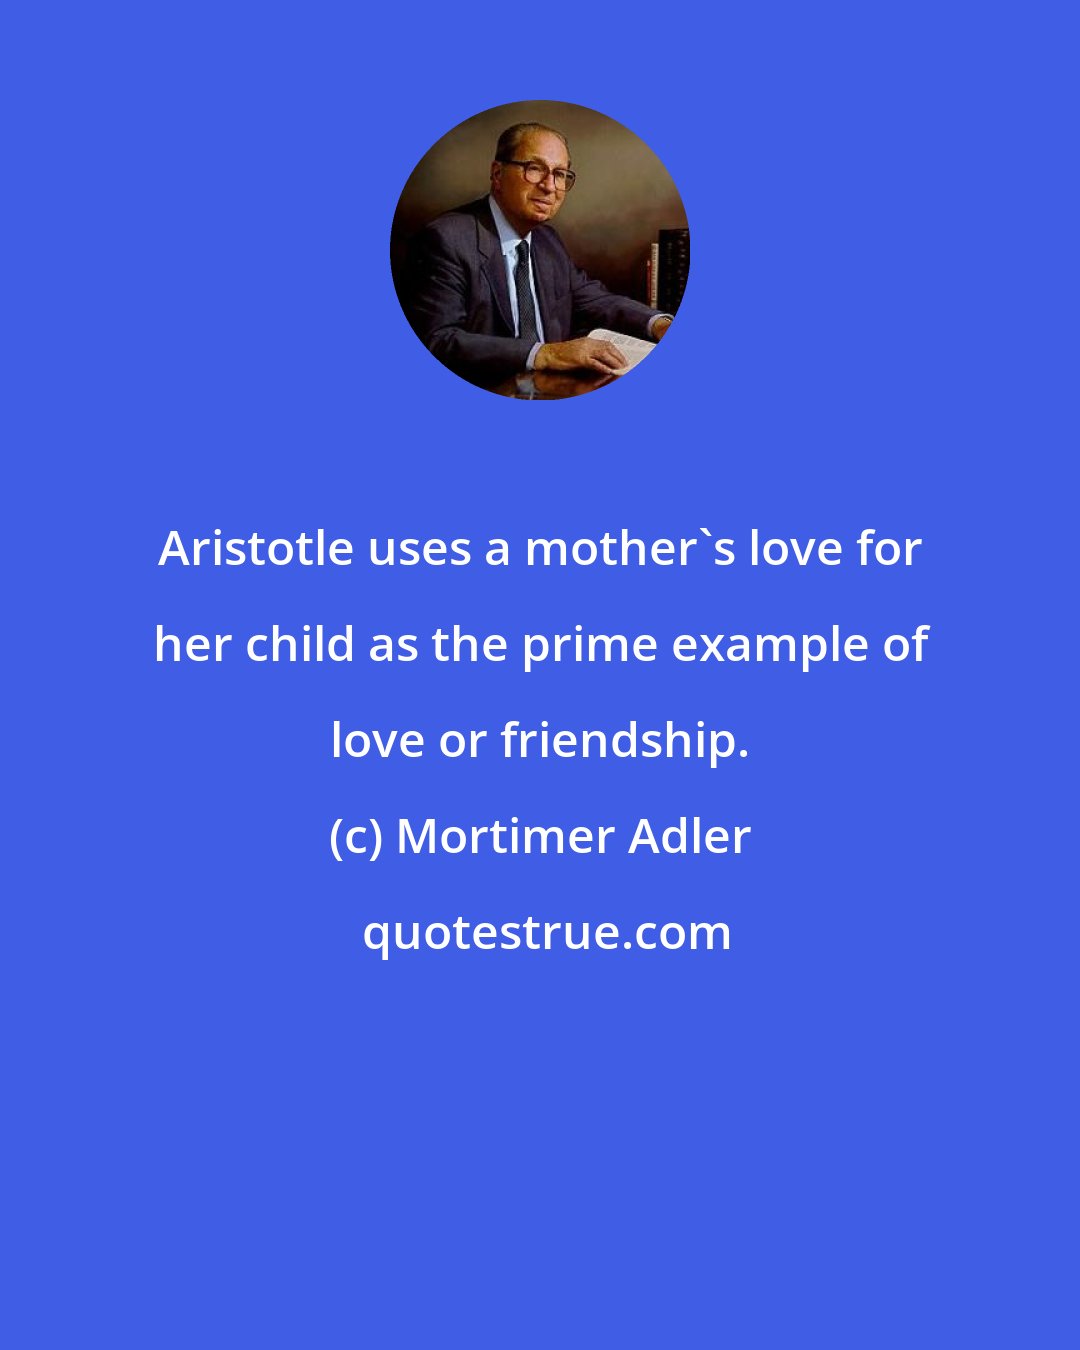 Mortimer Adler: Aristotle uses a mother's love for her child as the prime example of love or friendship.